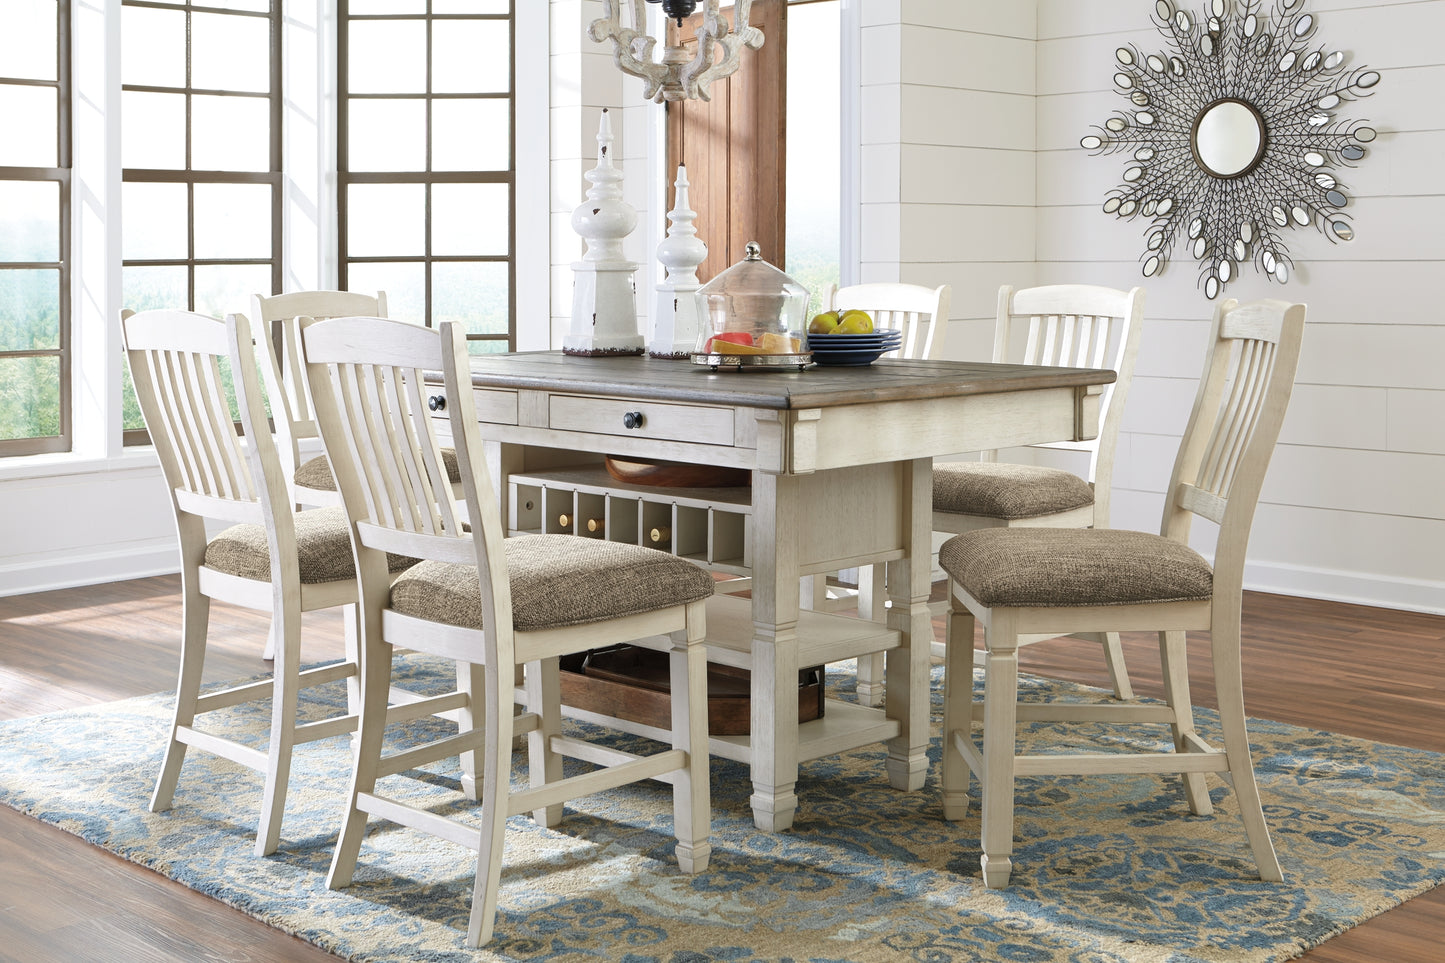 Bolanburg RECT Dining Room Counter Table JB's Furniture  Home Furniture, Home Decor, Furniture Store